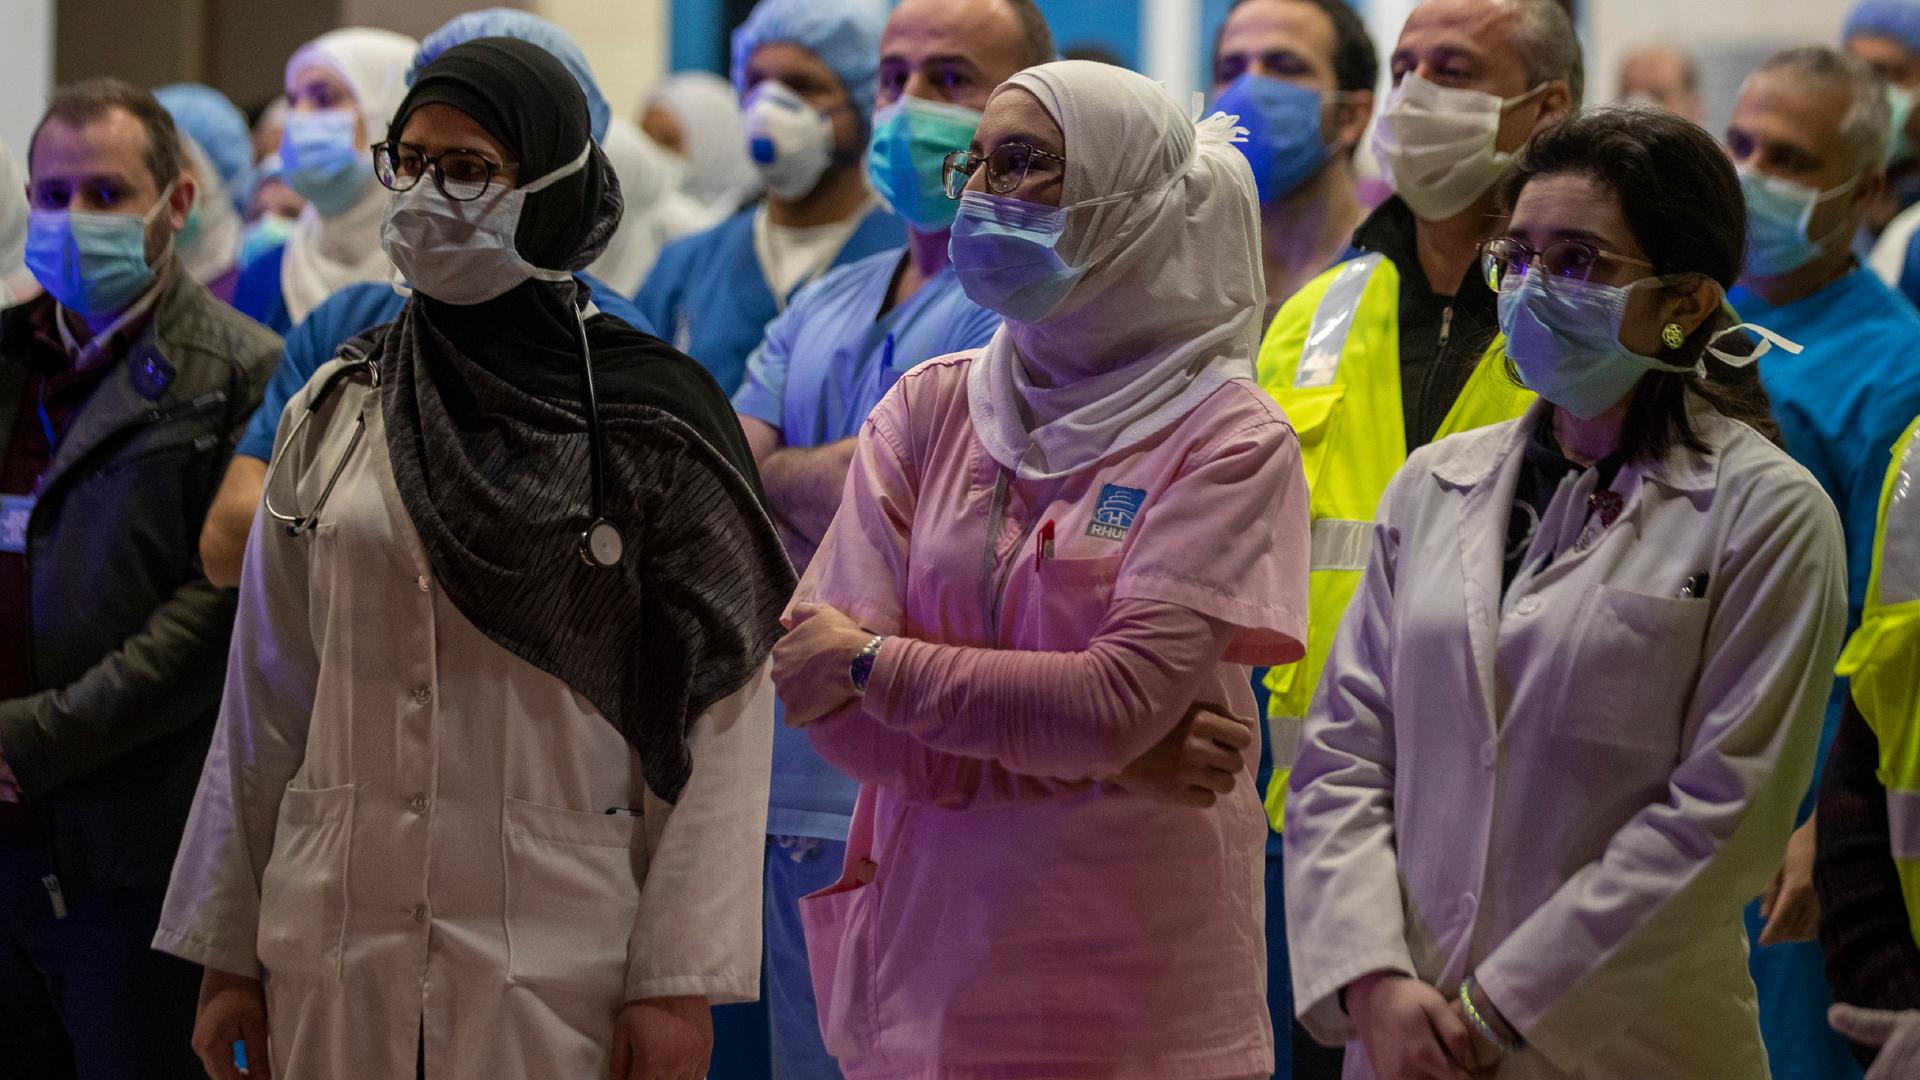 Three women health care workers in uniform, wearing headscarves and masks, stand and listen among a crowd of medical workers. 